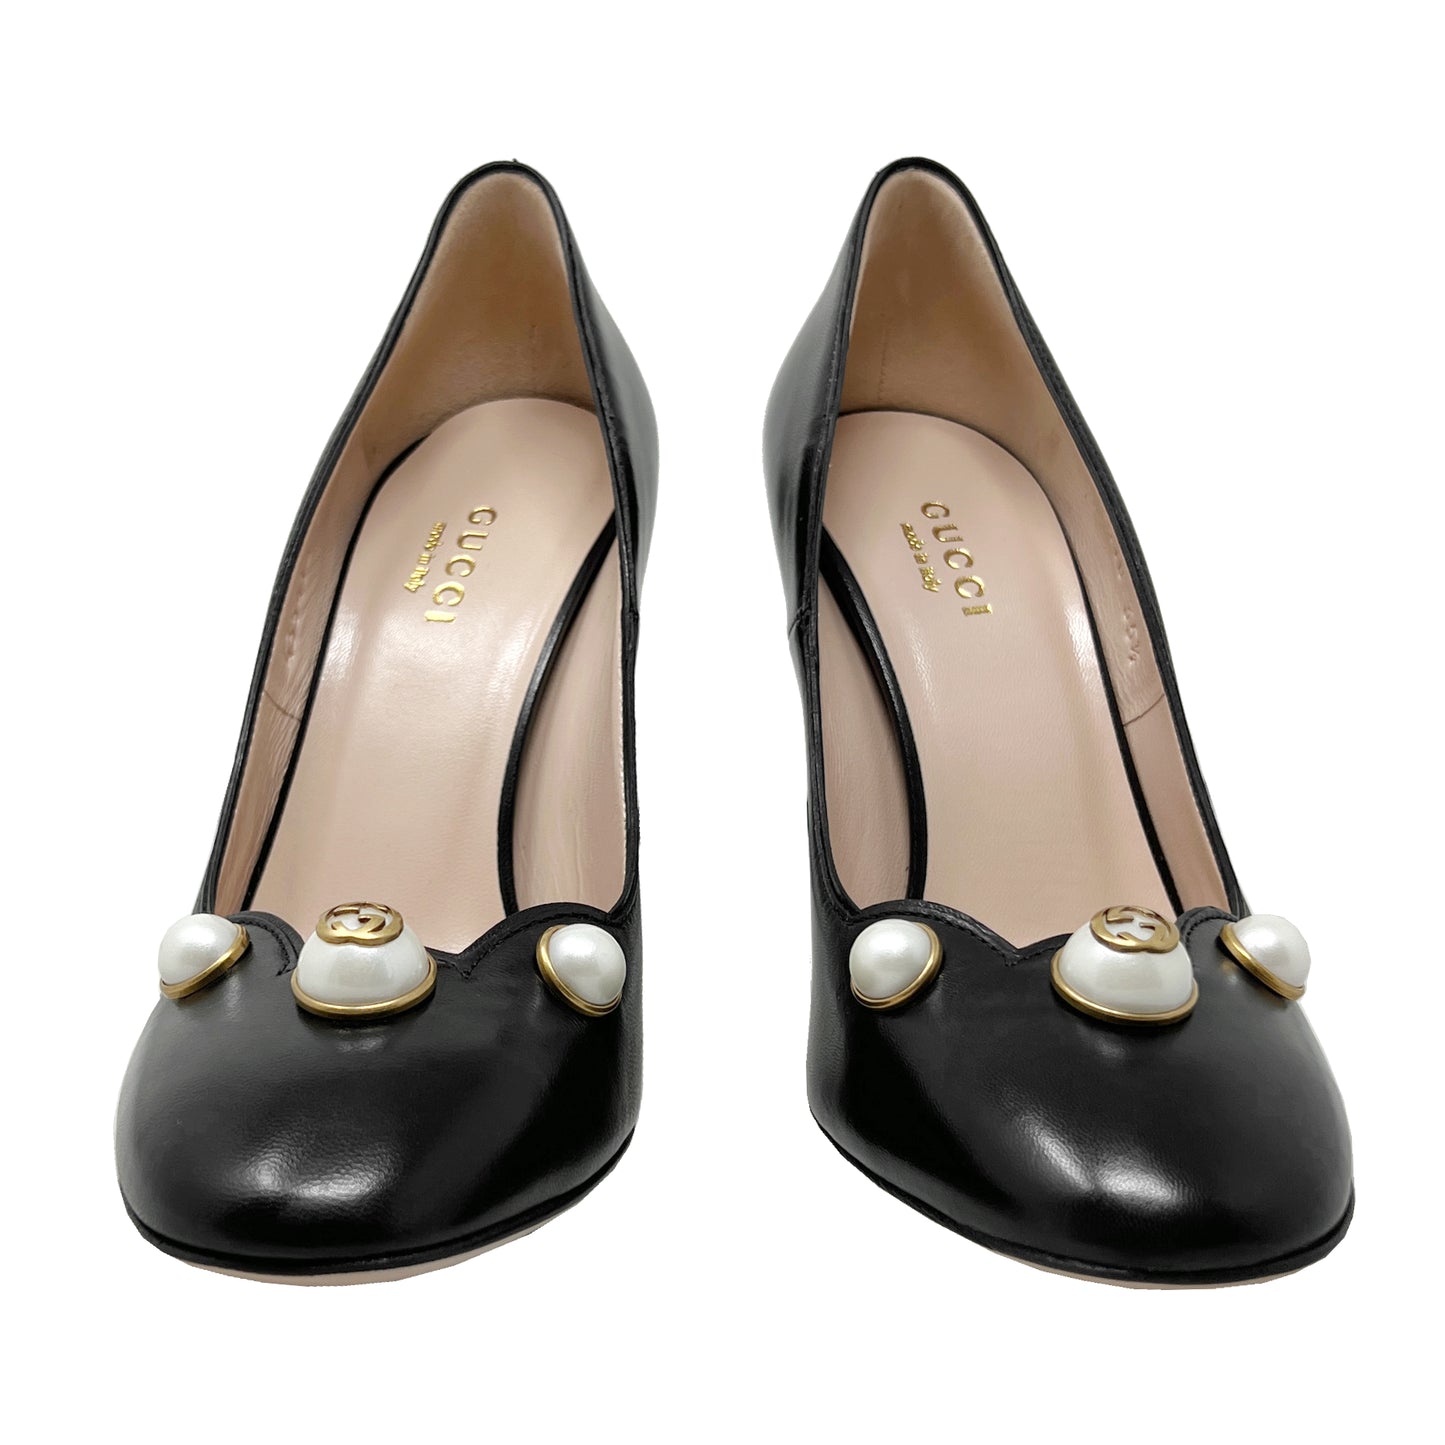 Gucci Willow Pearl Embellished GG Logo Scalloped Black Leather Round Toe Pumps Size EU 35.5